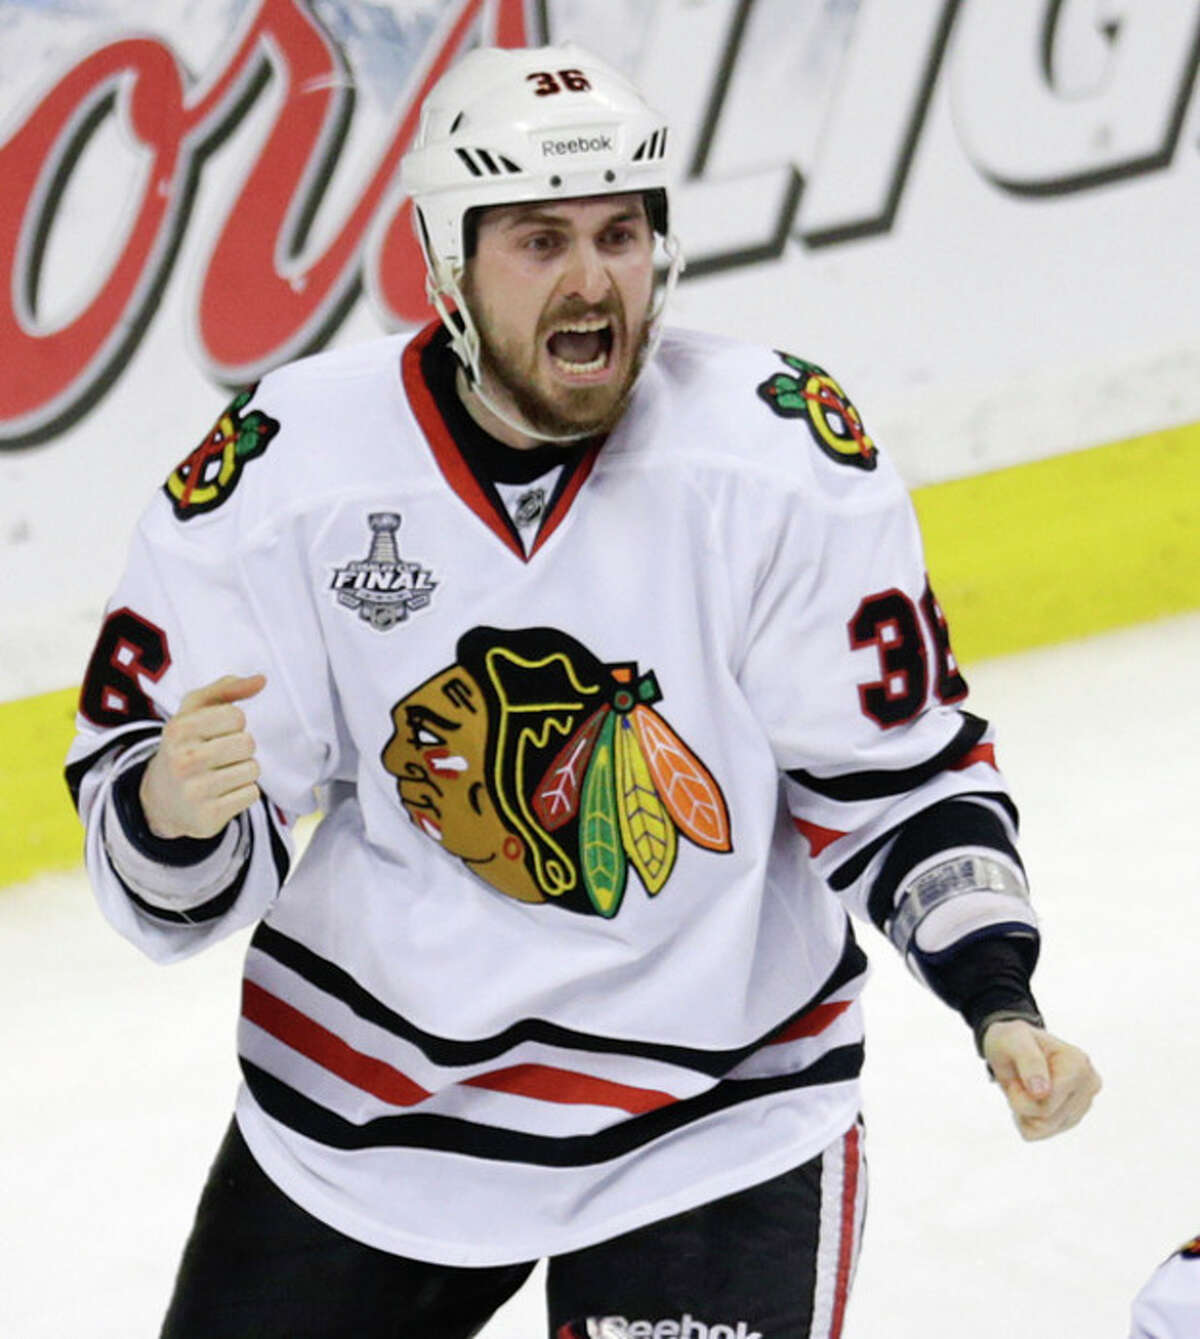 Chicago Blackhawks center Dave Bolland (36) celebrates his game winning goal against the Boston Bruins during the third period in Game 6 of the NHL hockey Stanley Cup Finals, Monday, June 24, 2013, in Boston. The Blackhawks won 3-2. (AP Photo/Charles Krupa)